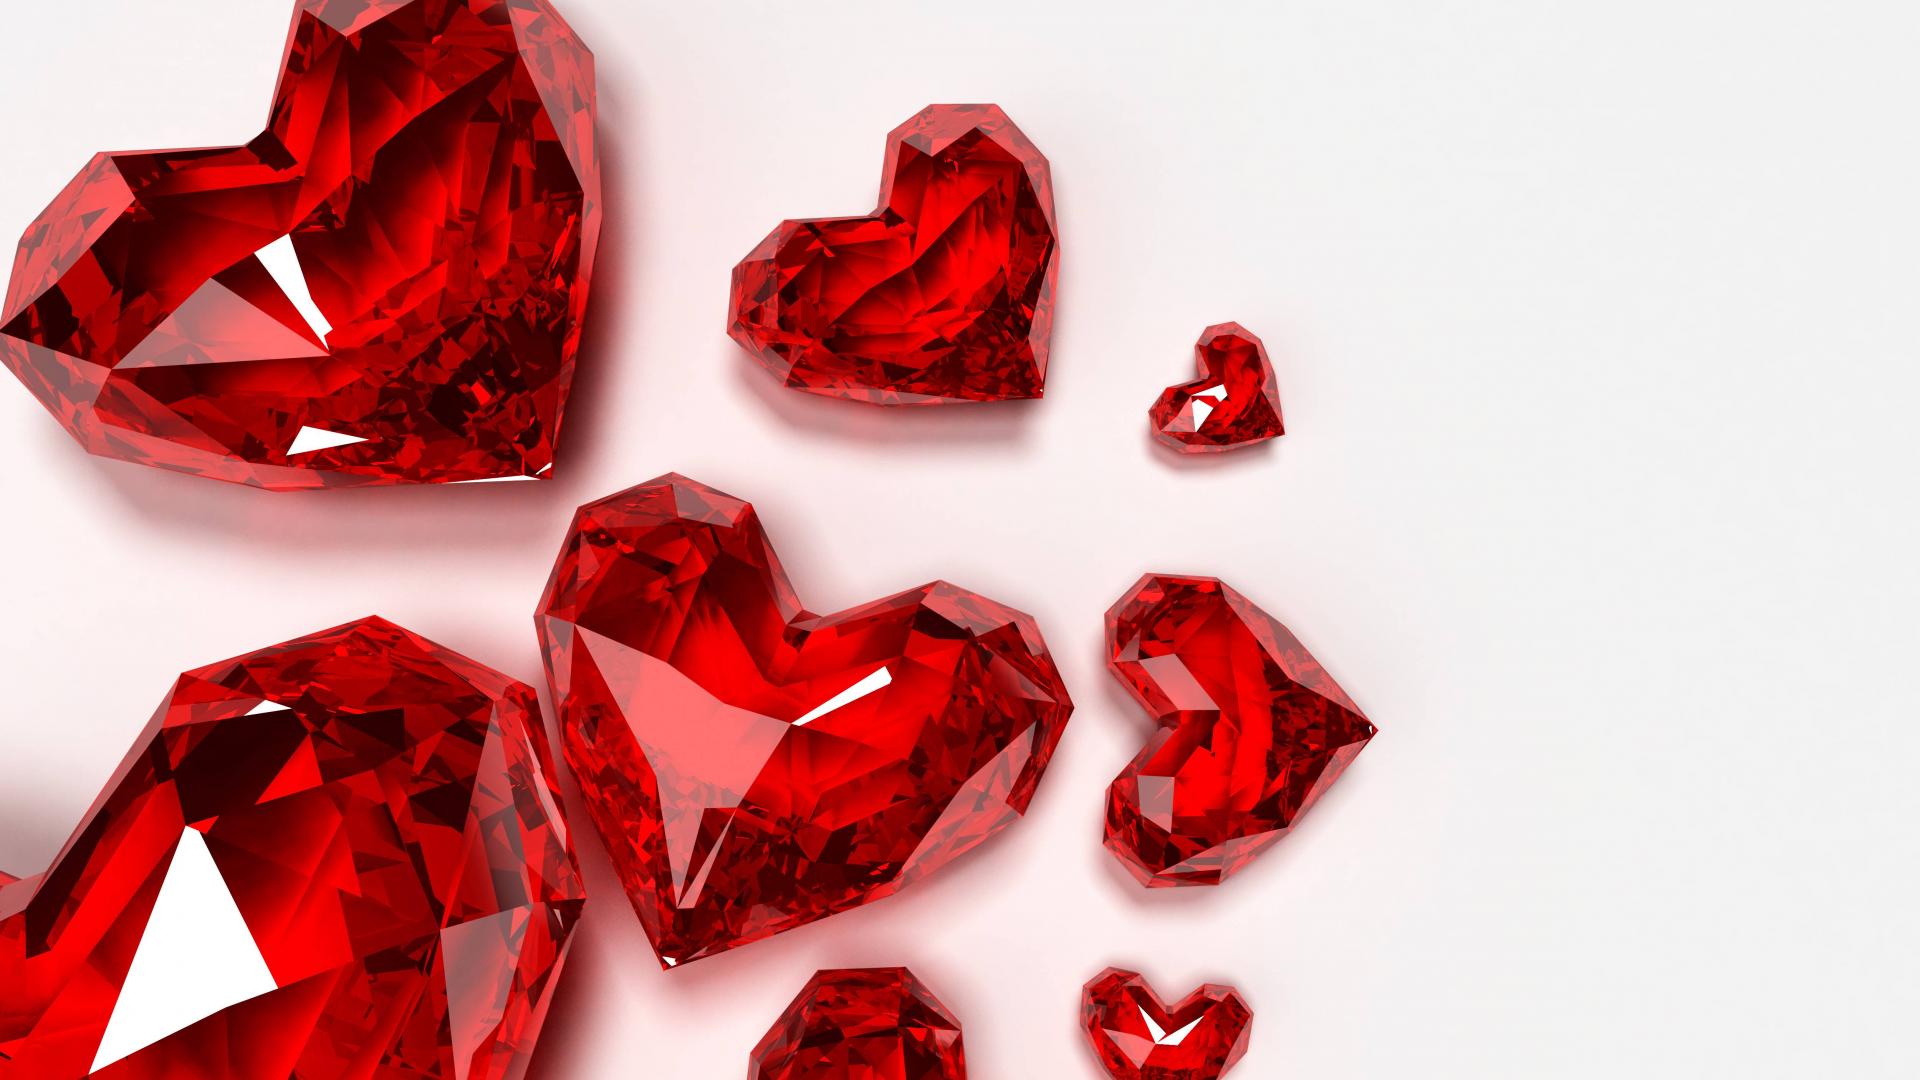 Red crystal crystals hearts wallpaper - - High Quality